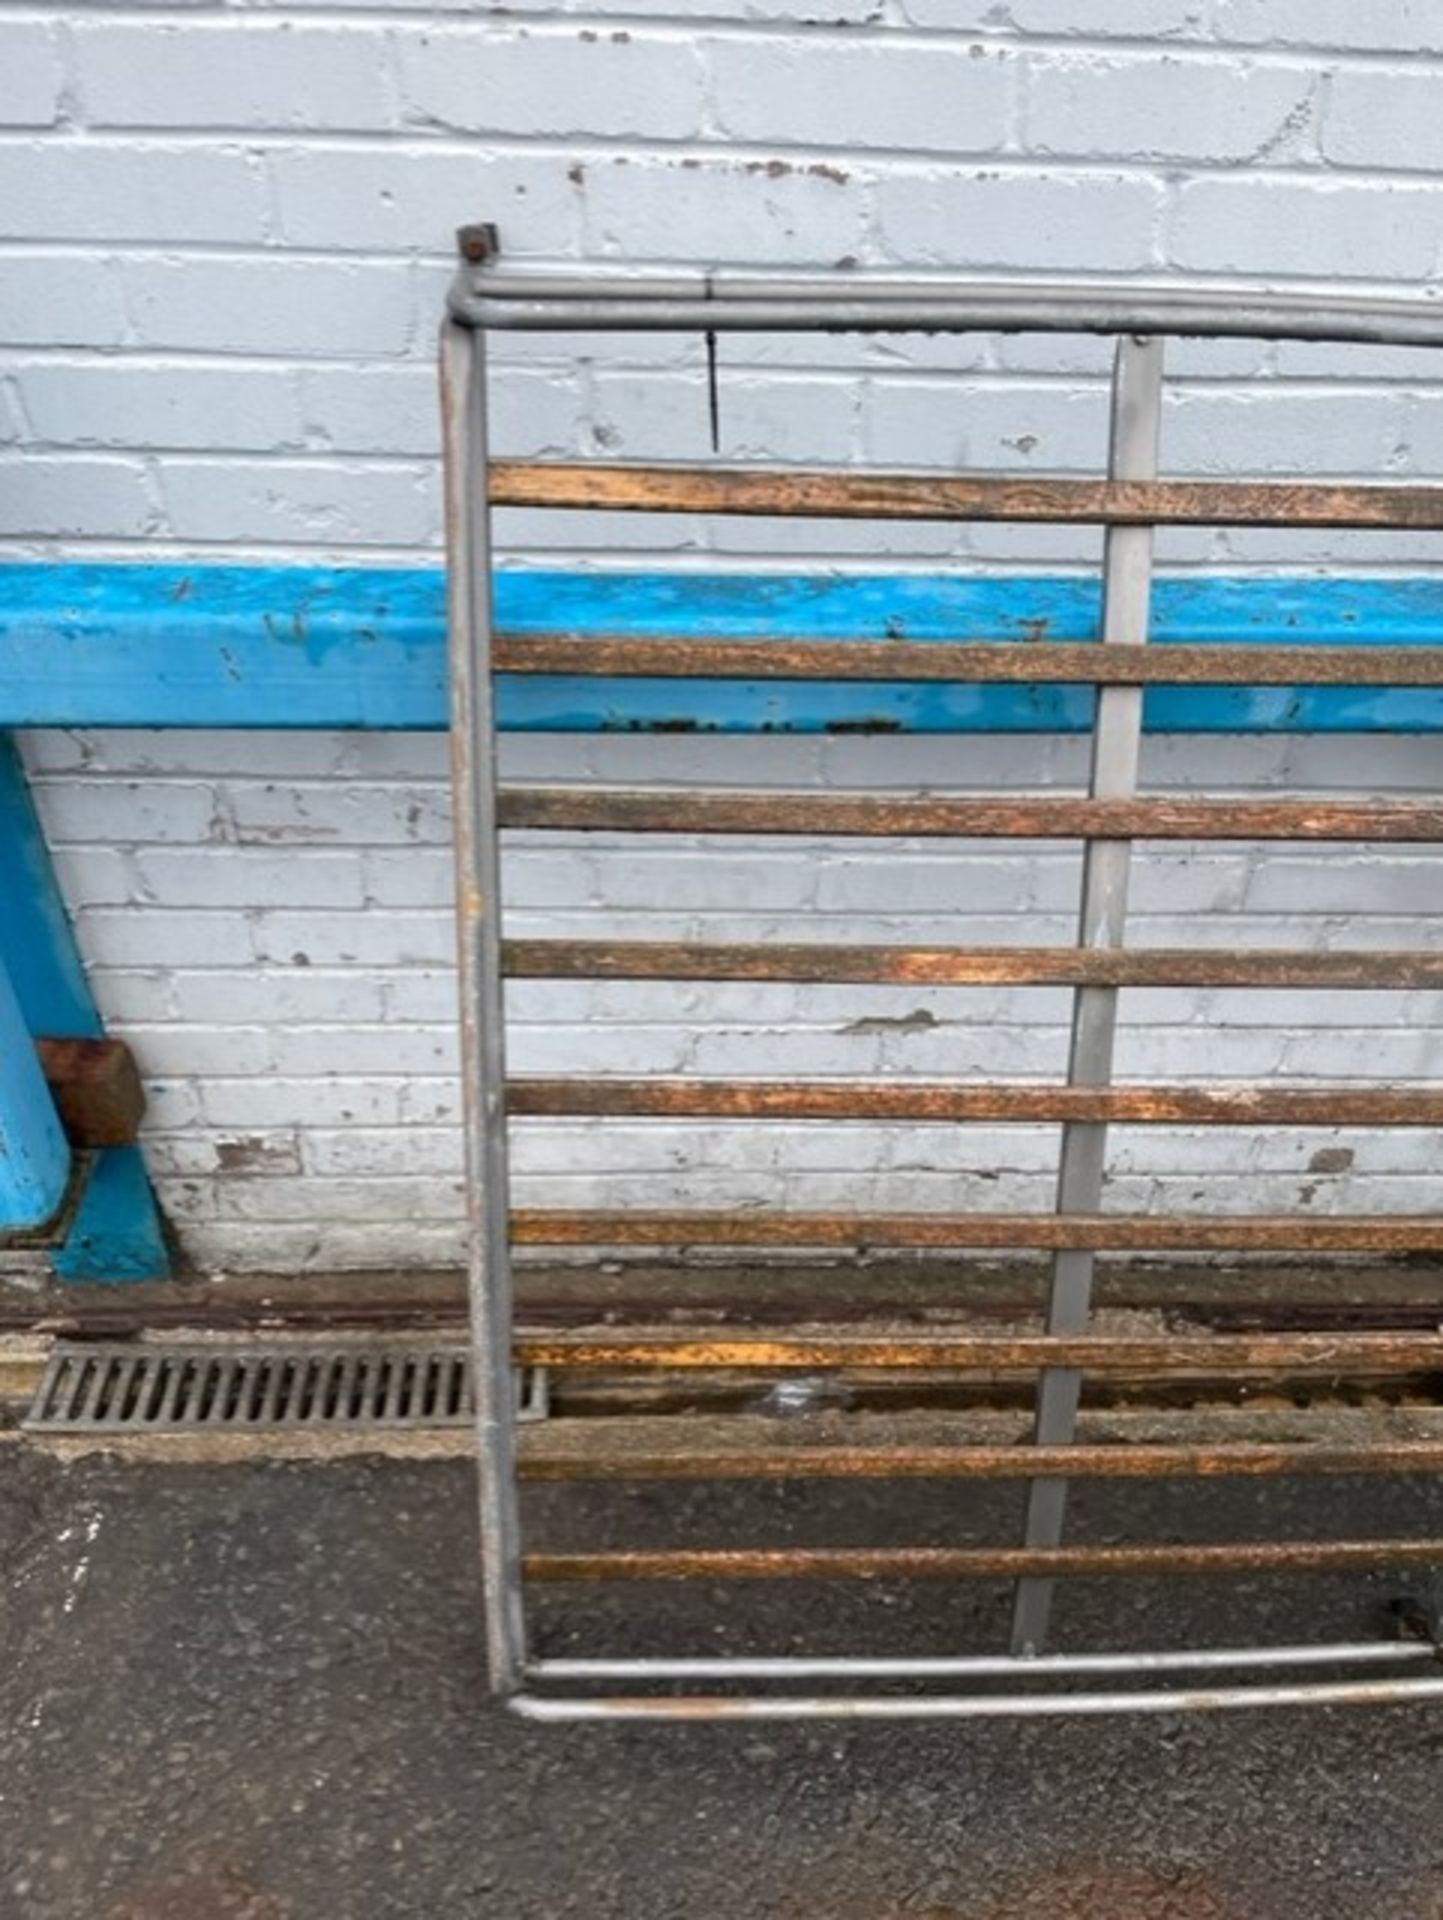 Old version vw camper van roof rack in fair condition if you have them you will know what this is - Image 3 of 4